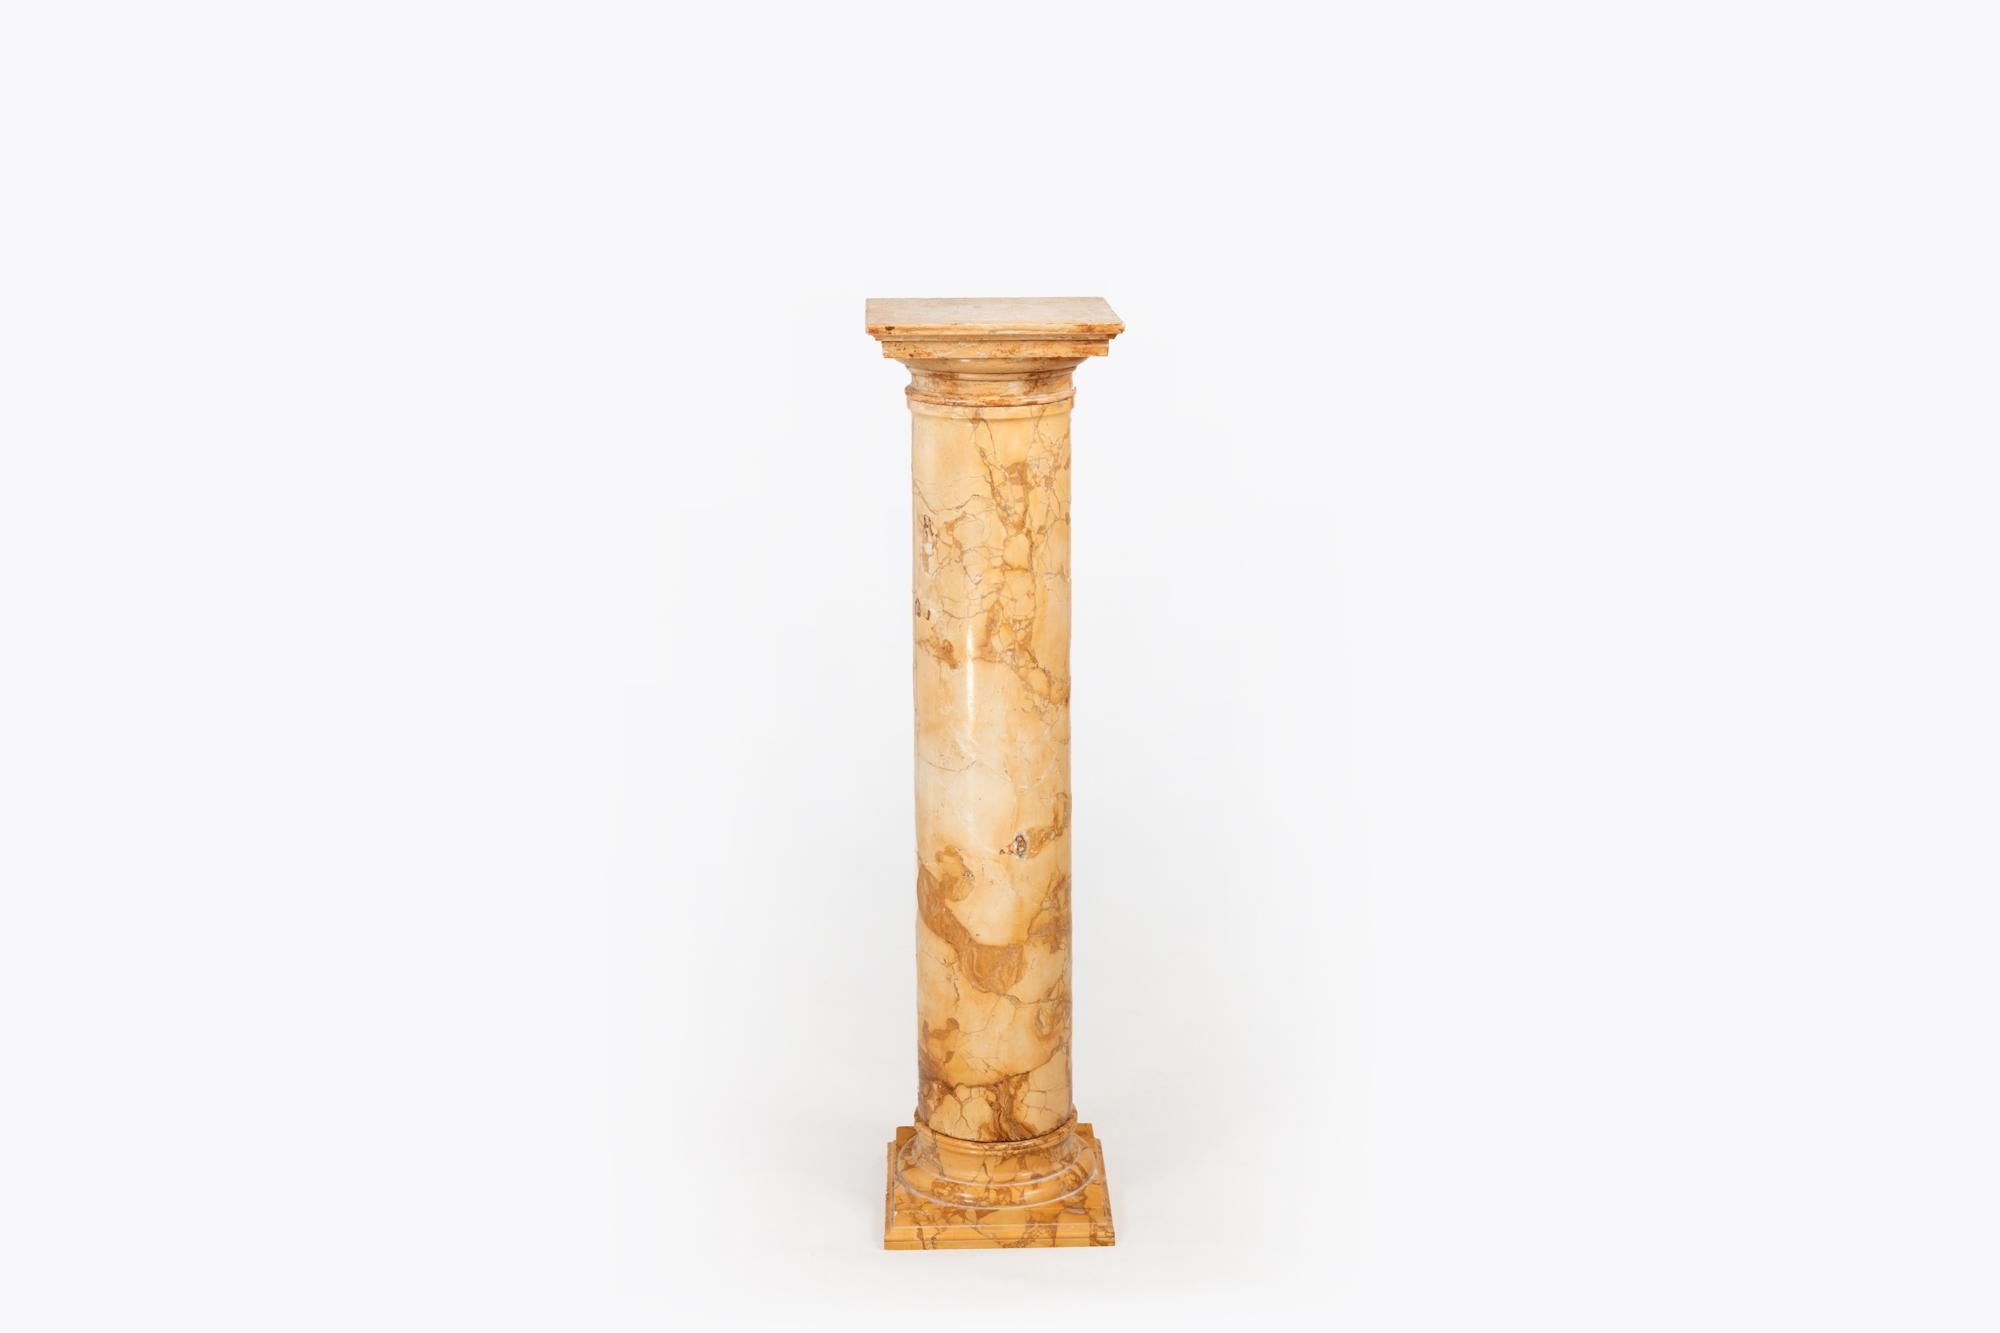 19th Century marble plinth in the form of a classical column. The solid cylindrical barrel in yellow and ochre coloured marble, rests on a stepped square base and is surmounted by a square marble plate resting on top of the column.